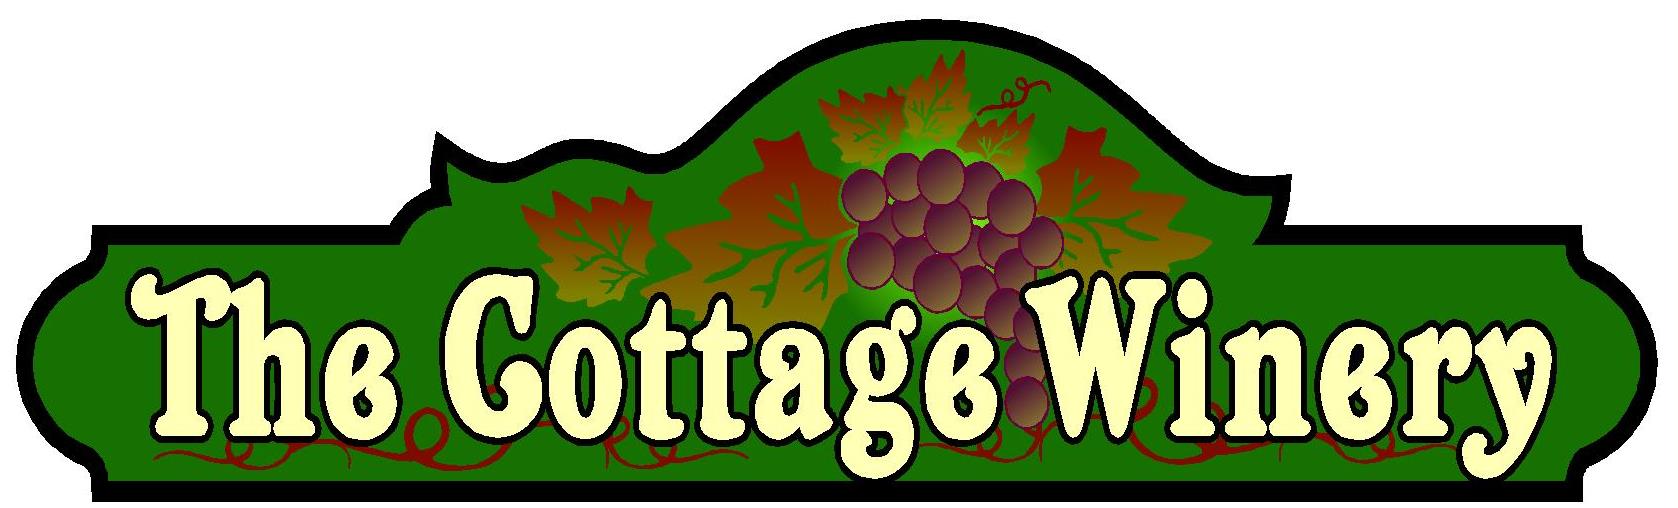 The Cottage Winery.jpg